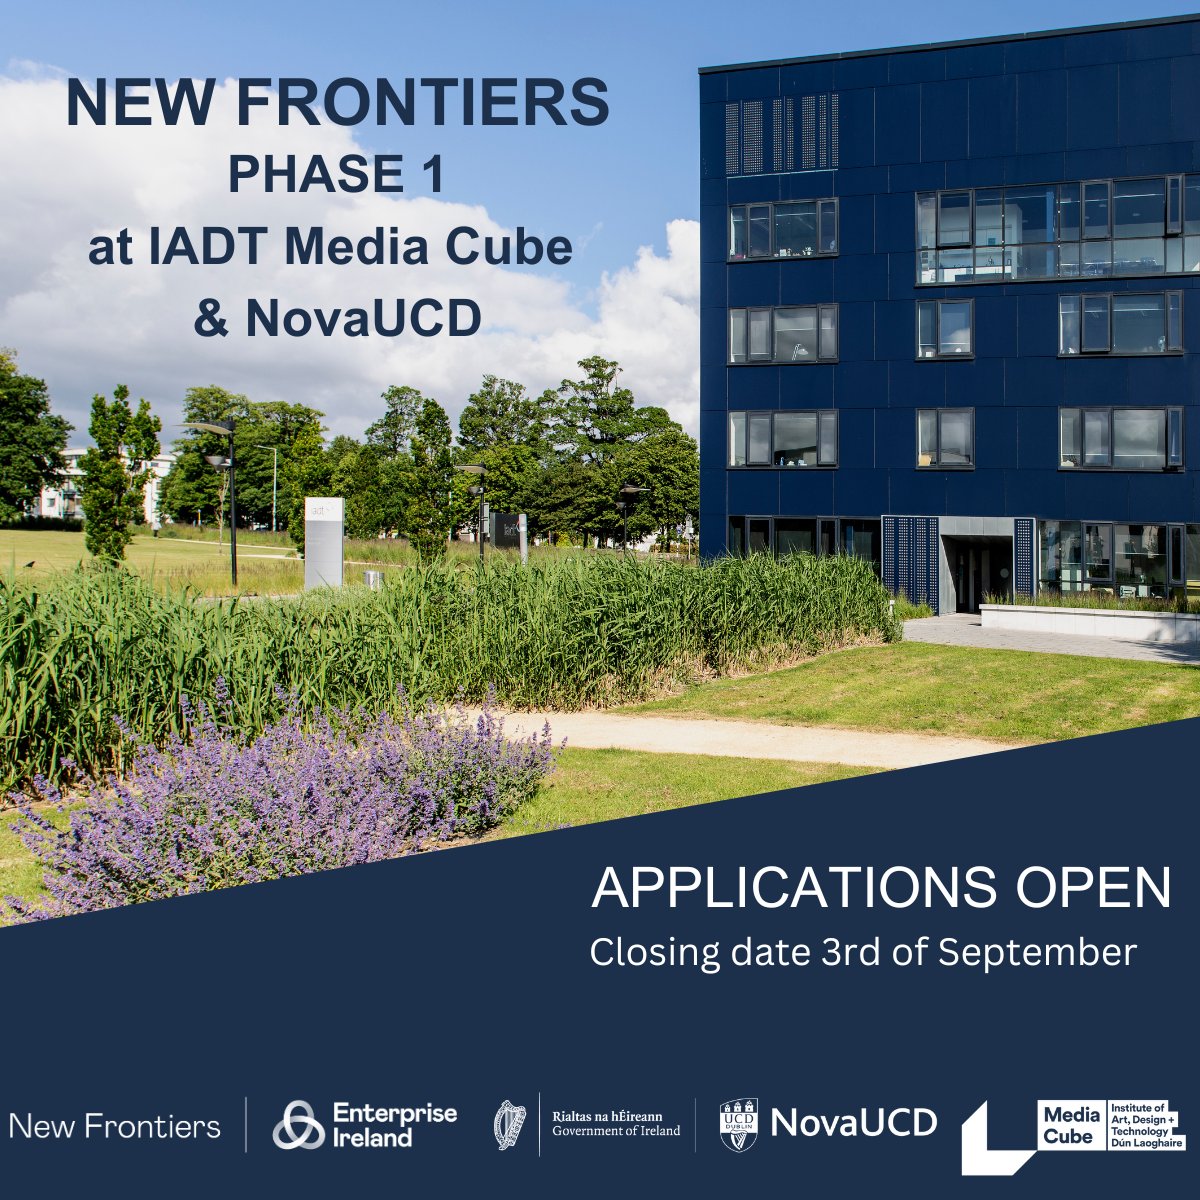 APPLICATIONS OPEN for Phase 1 of @EI_NewFrontiers at @MediaCubeIADT in partnership with @NovaUCD ! If you have an innovative business idea apply now! More information and how to apply via the link: mediacube.ie/services/new-f… #startinireland #globalambition